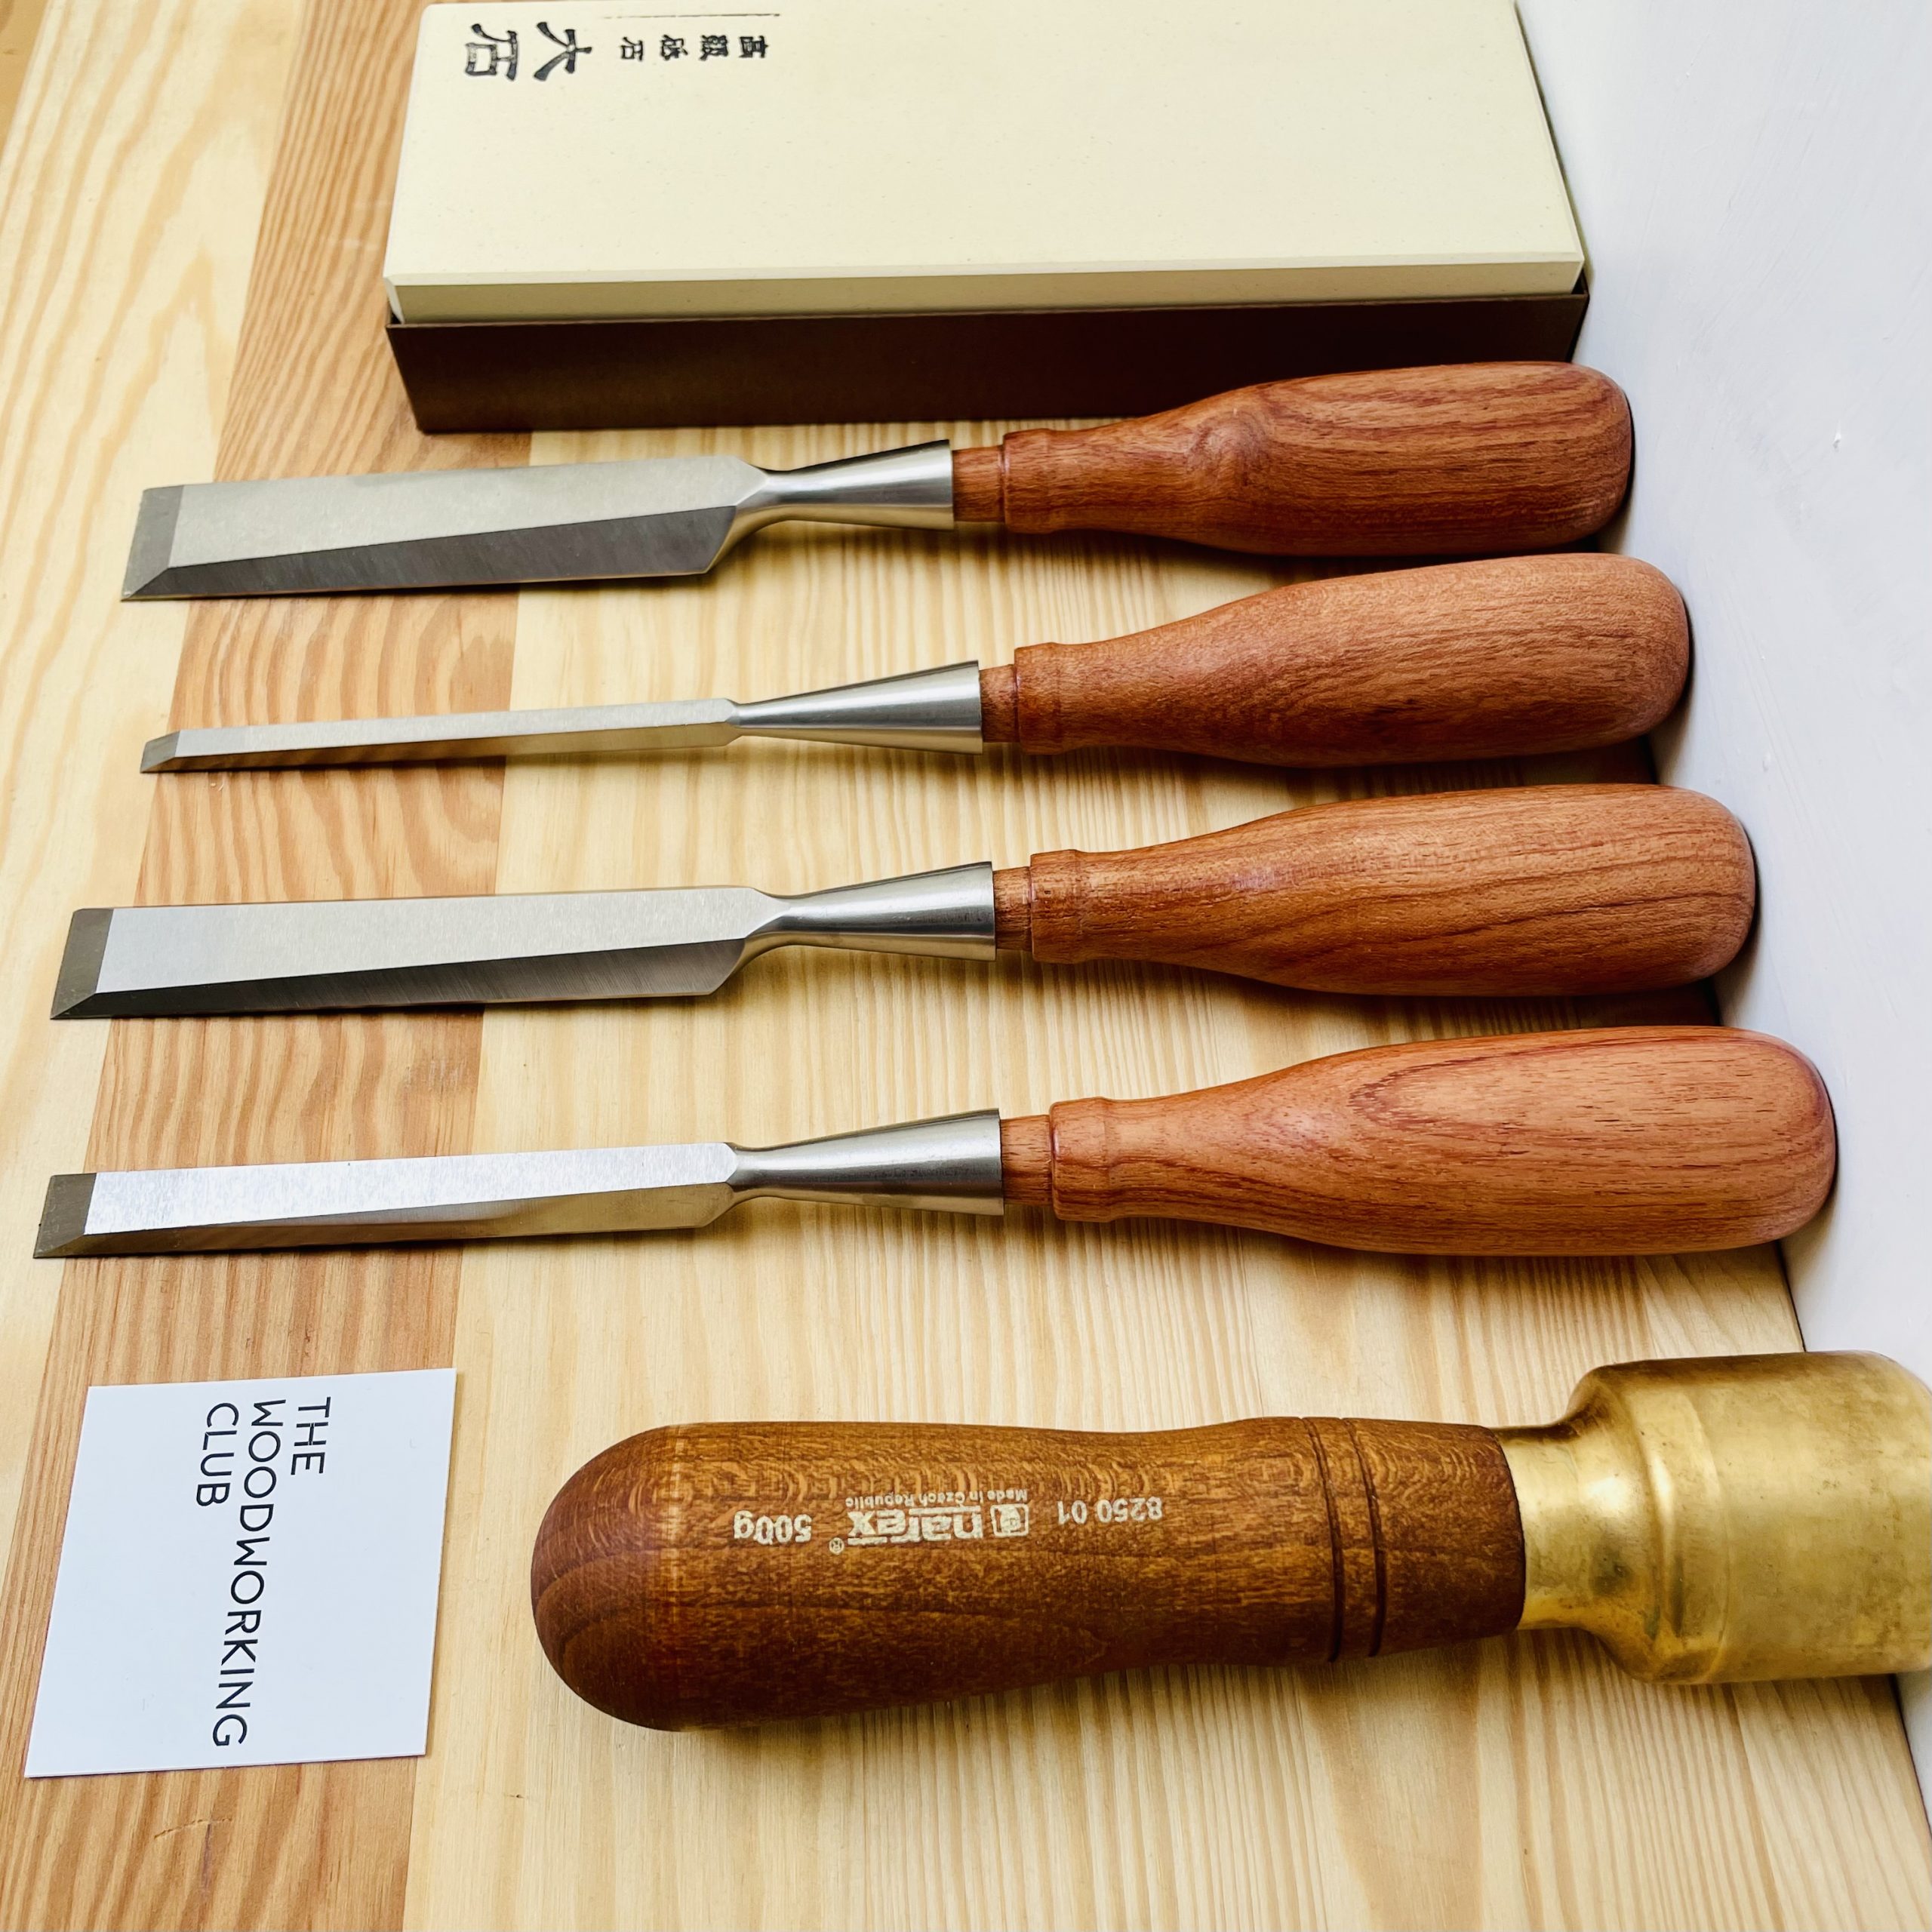 Chisels and Wooden Joinery Mallet Set